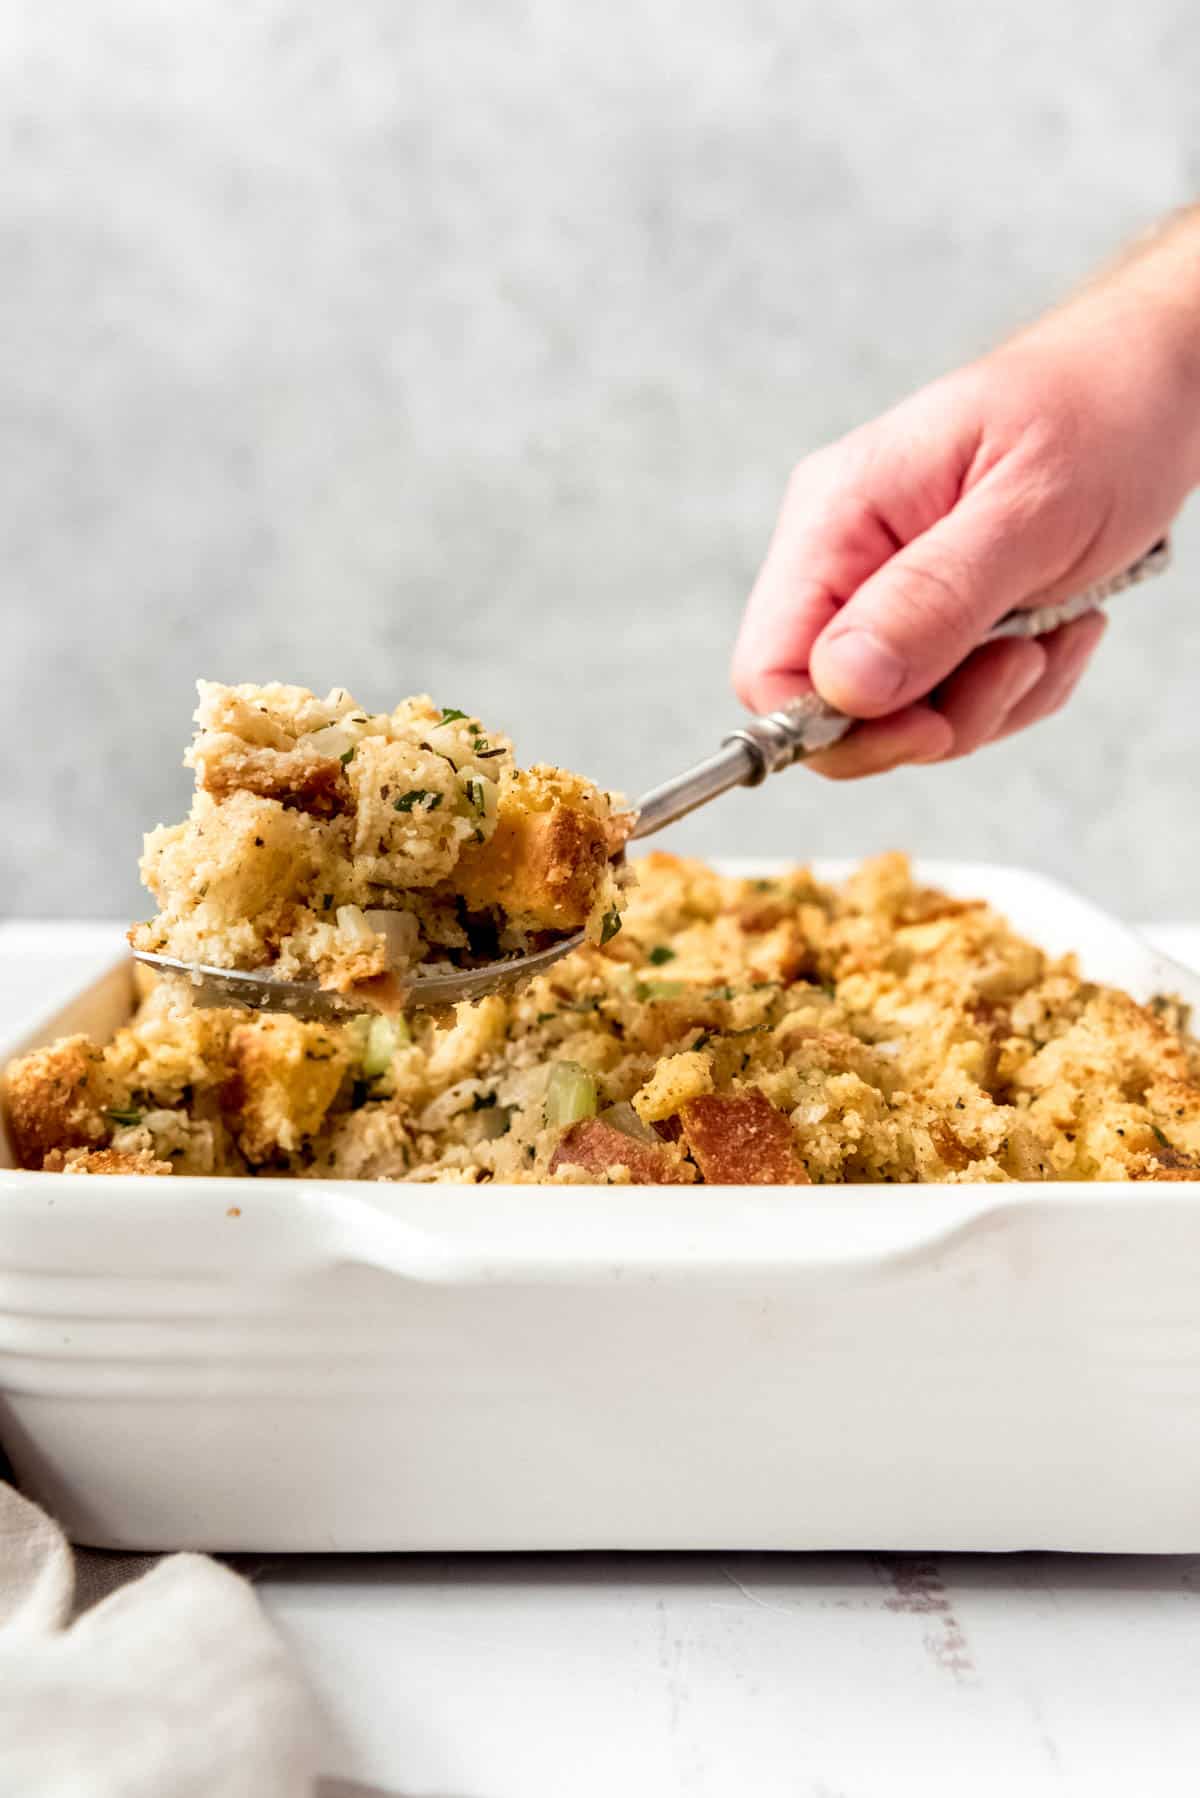 An image of a hand lifting a scoop of cornbread dressing out of a white baking dish.